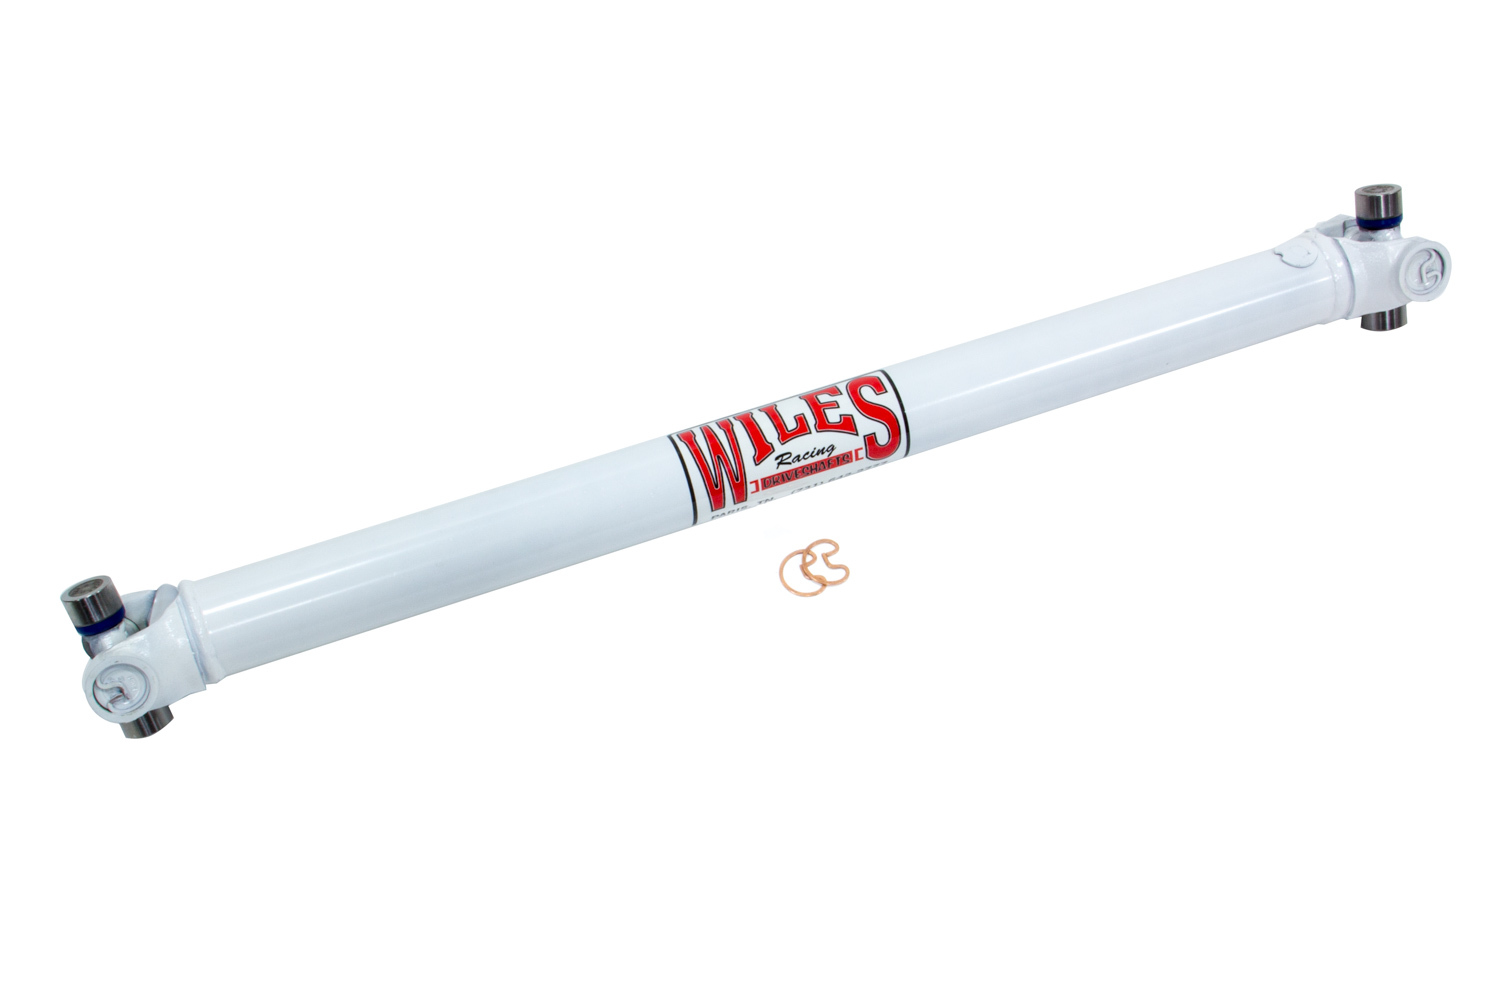 Wiles Driveshaft S283310 Drive Shaft, 31 in Long, 2 in OD, 1310 U-Joints, Steel, White Paint, Universal, Each